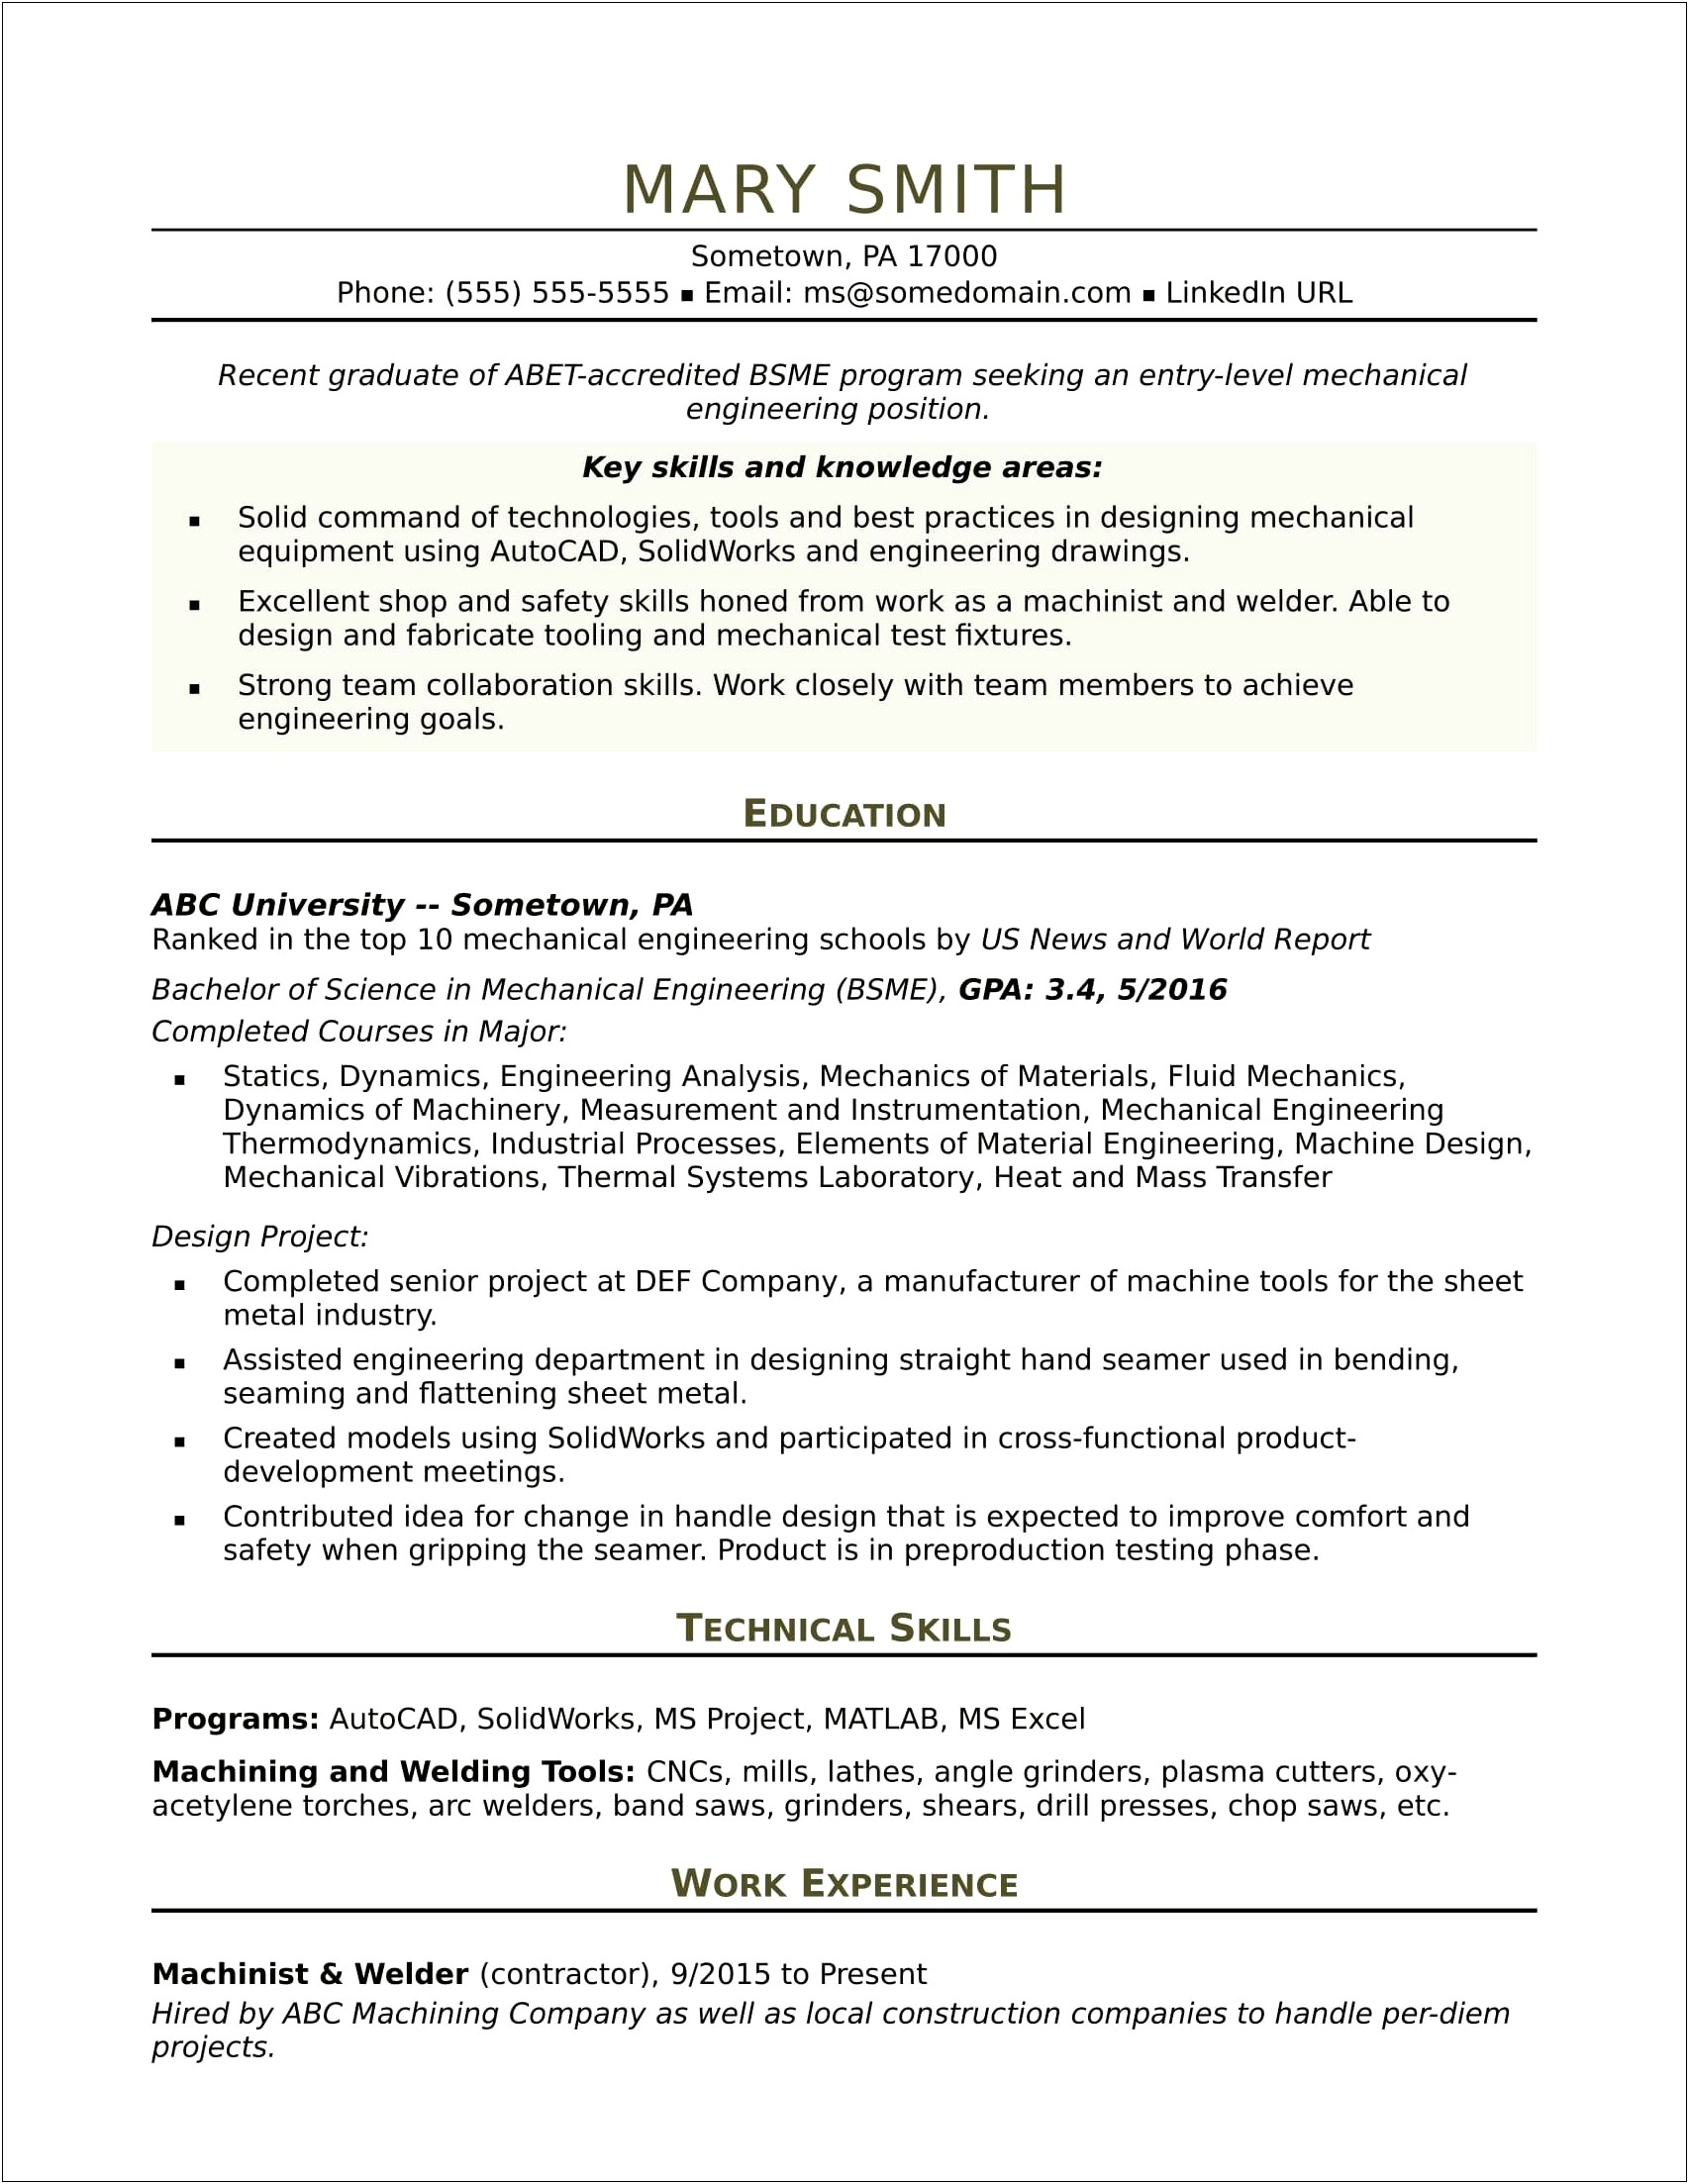 Trying To Apply For Pa School Resume